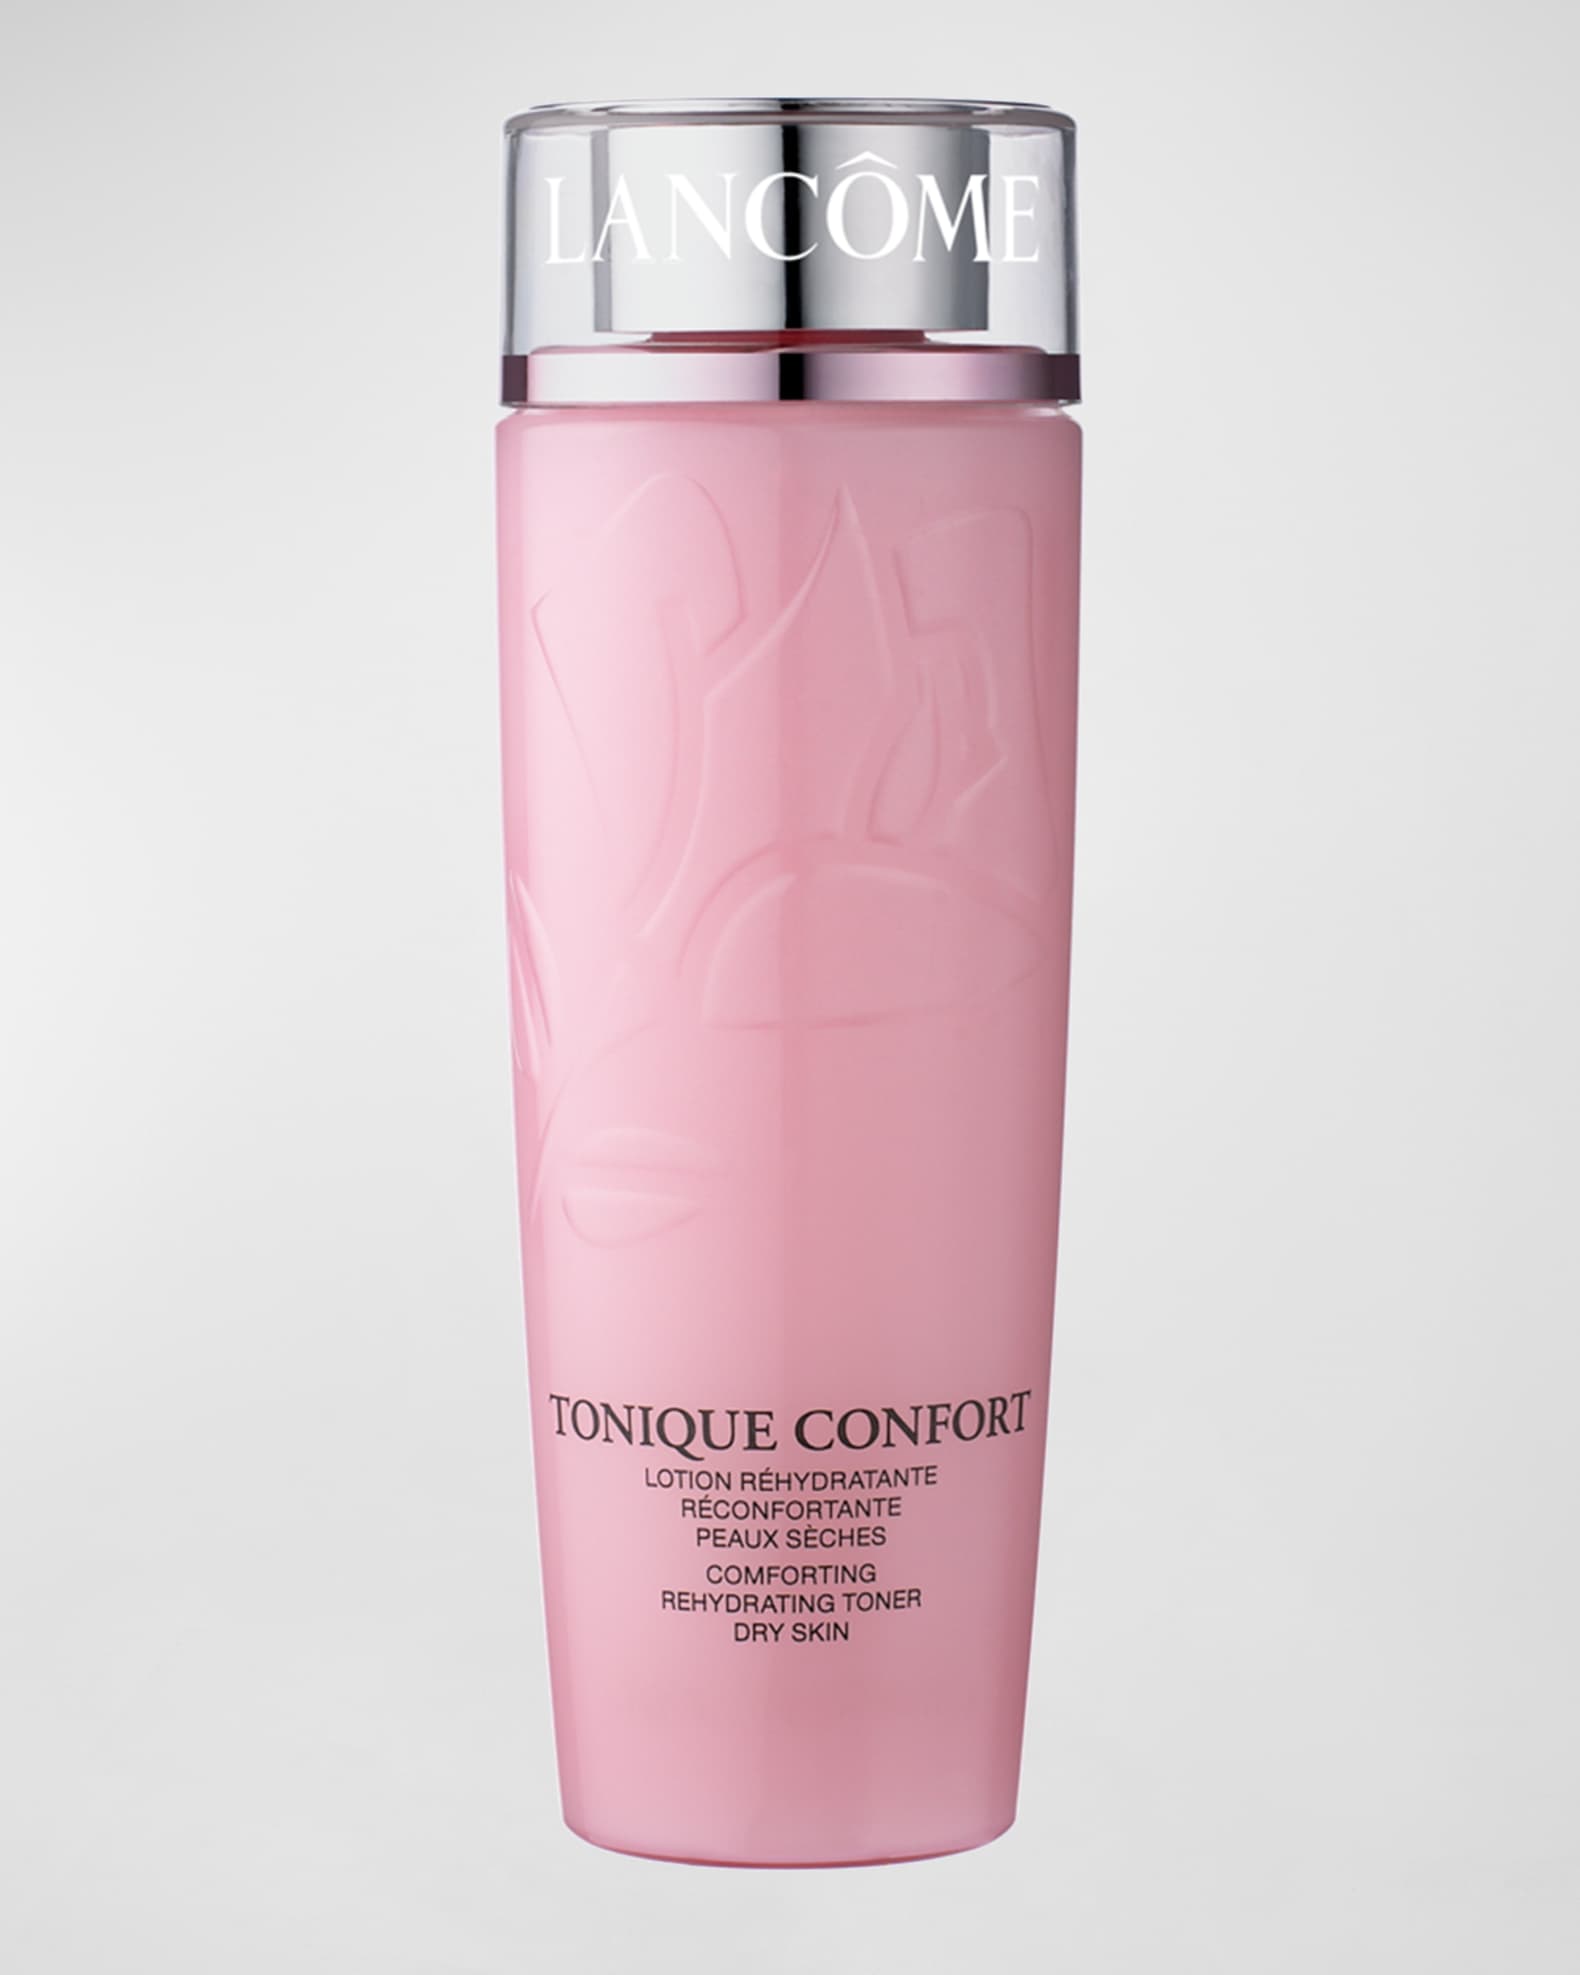 fort Bedre Demokratisk parti Lancome Tonique Confort Re-Hydrating Comforting Toner with Acacia Honey,  13.4 oz. | Neiman Marcus